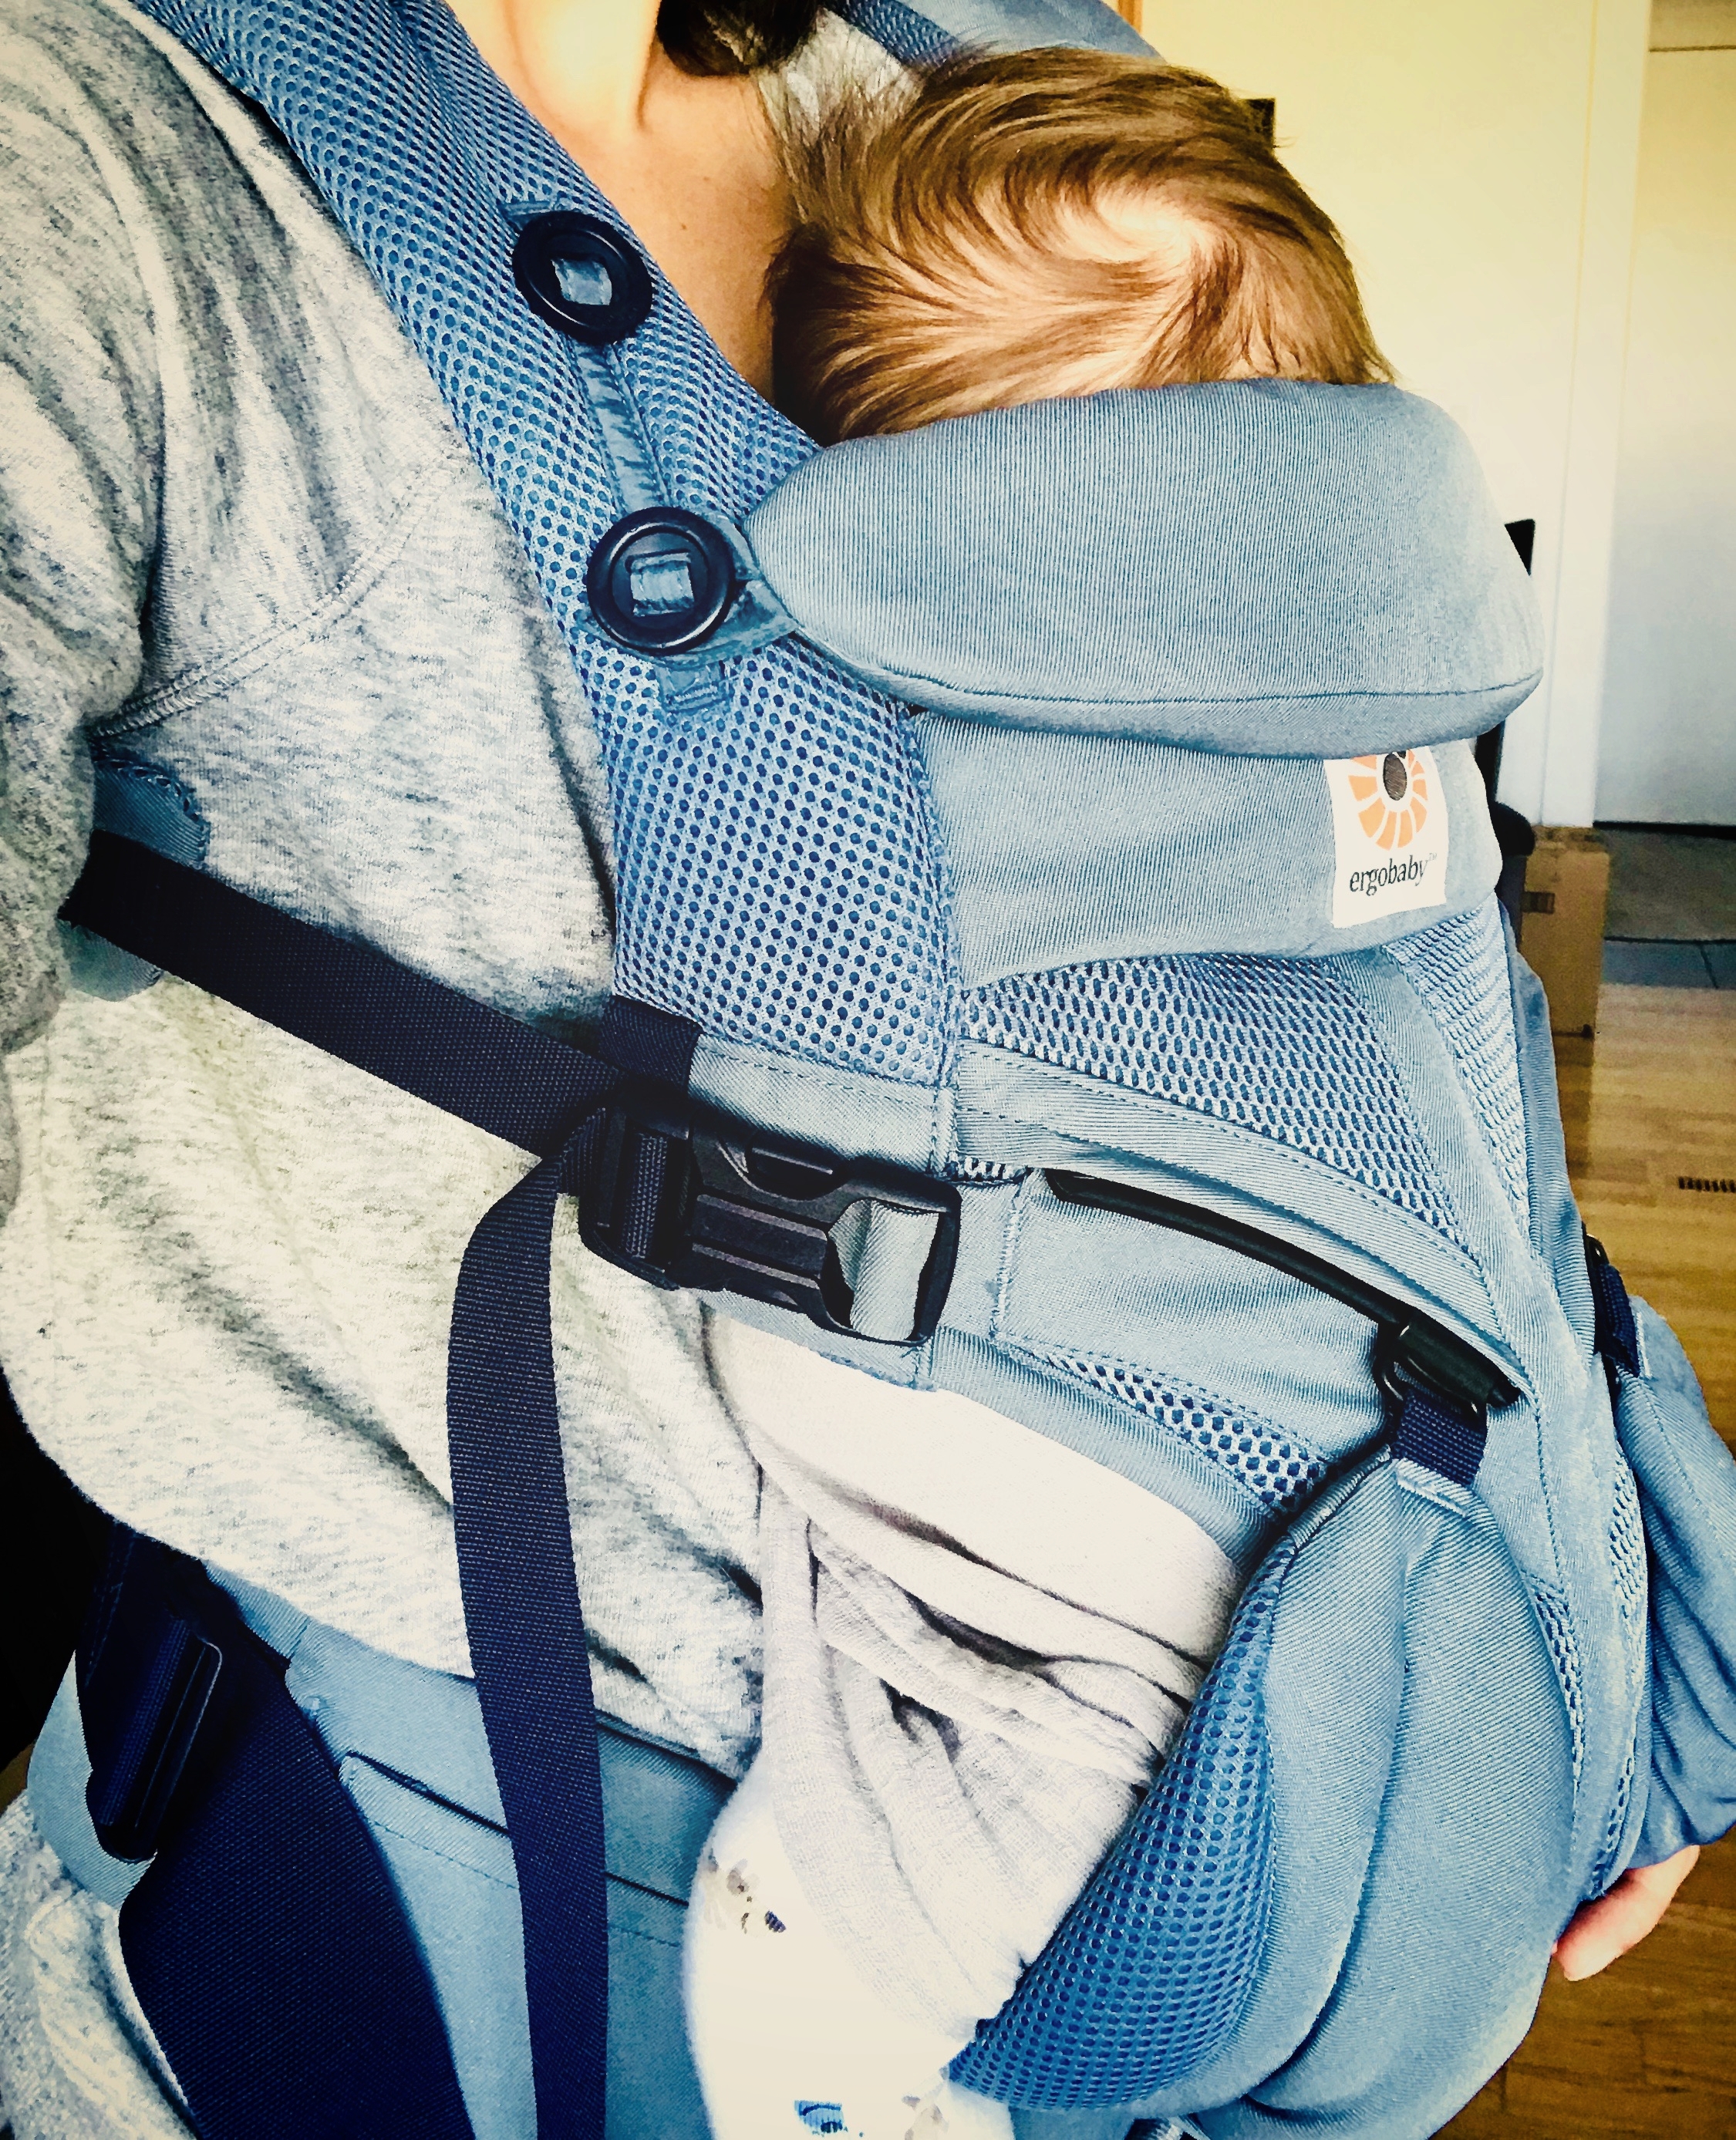 i love my ergobaby baby carrier so i can get things done!